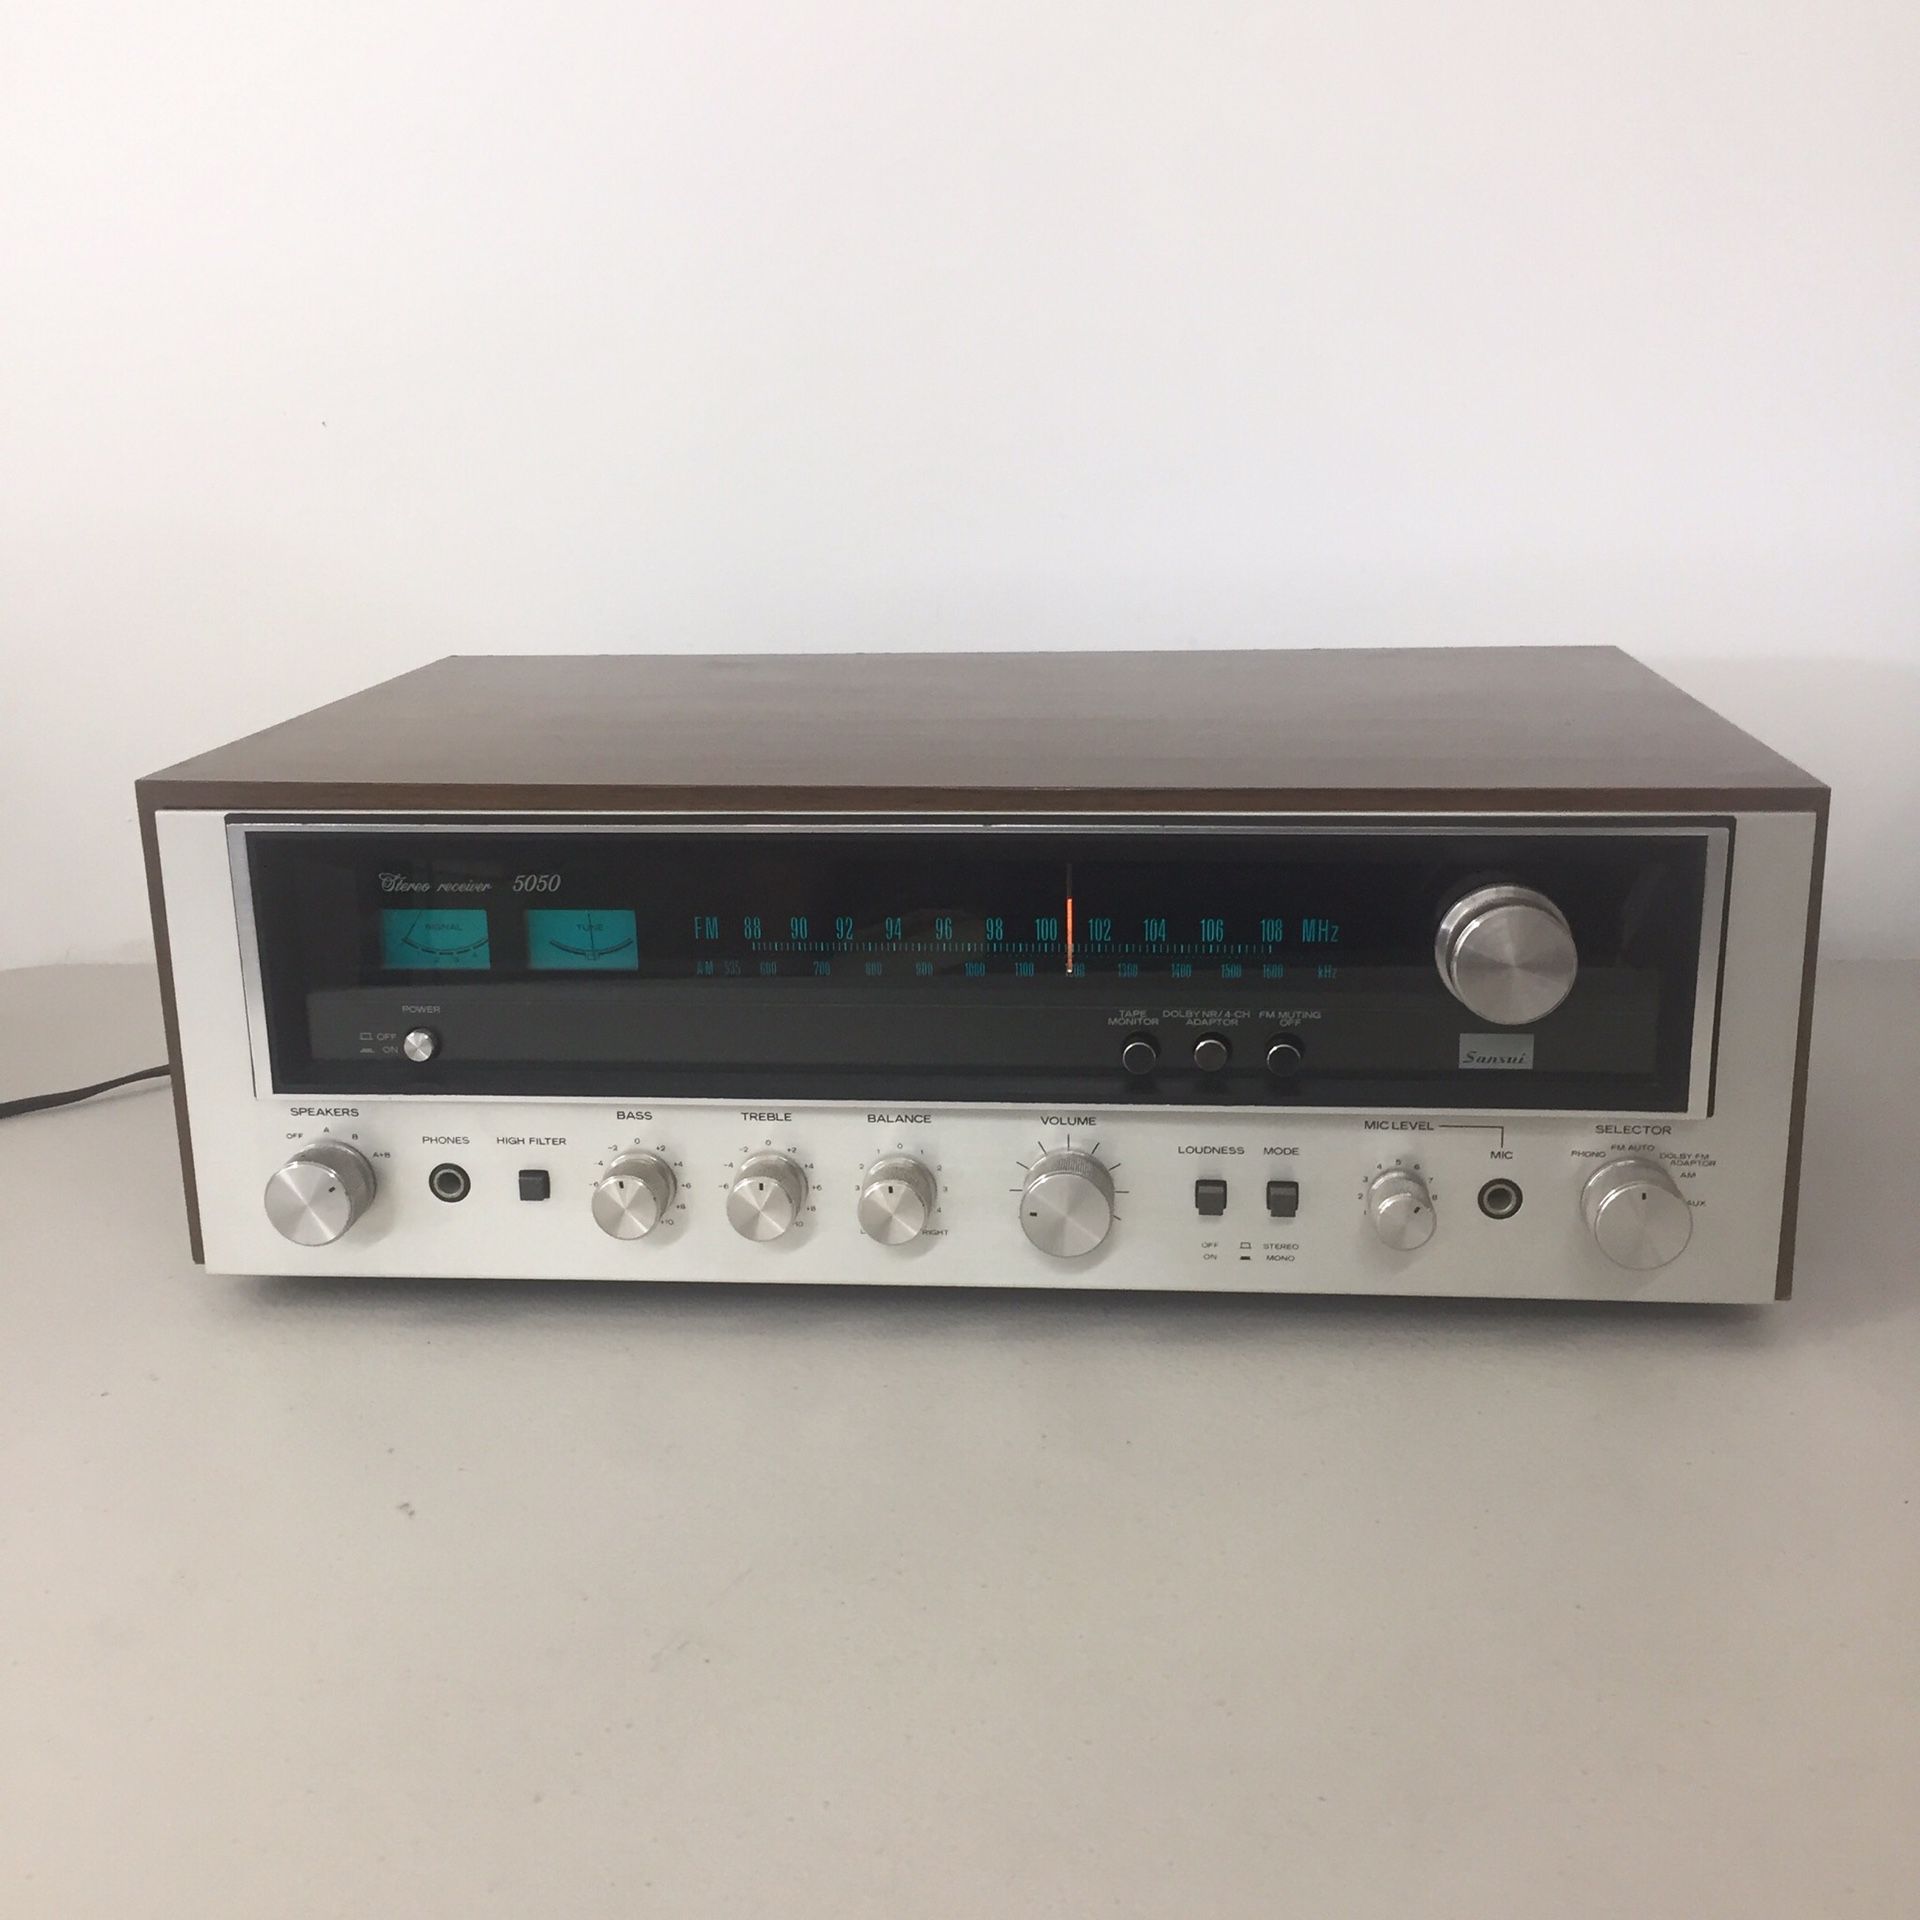 Sansui 5050 stereo receiver vintage hifi from Japan